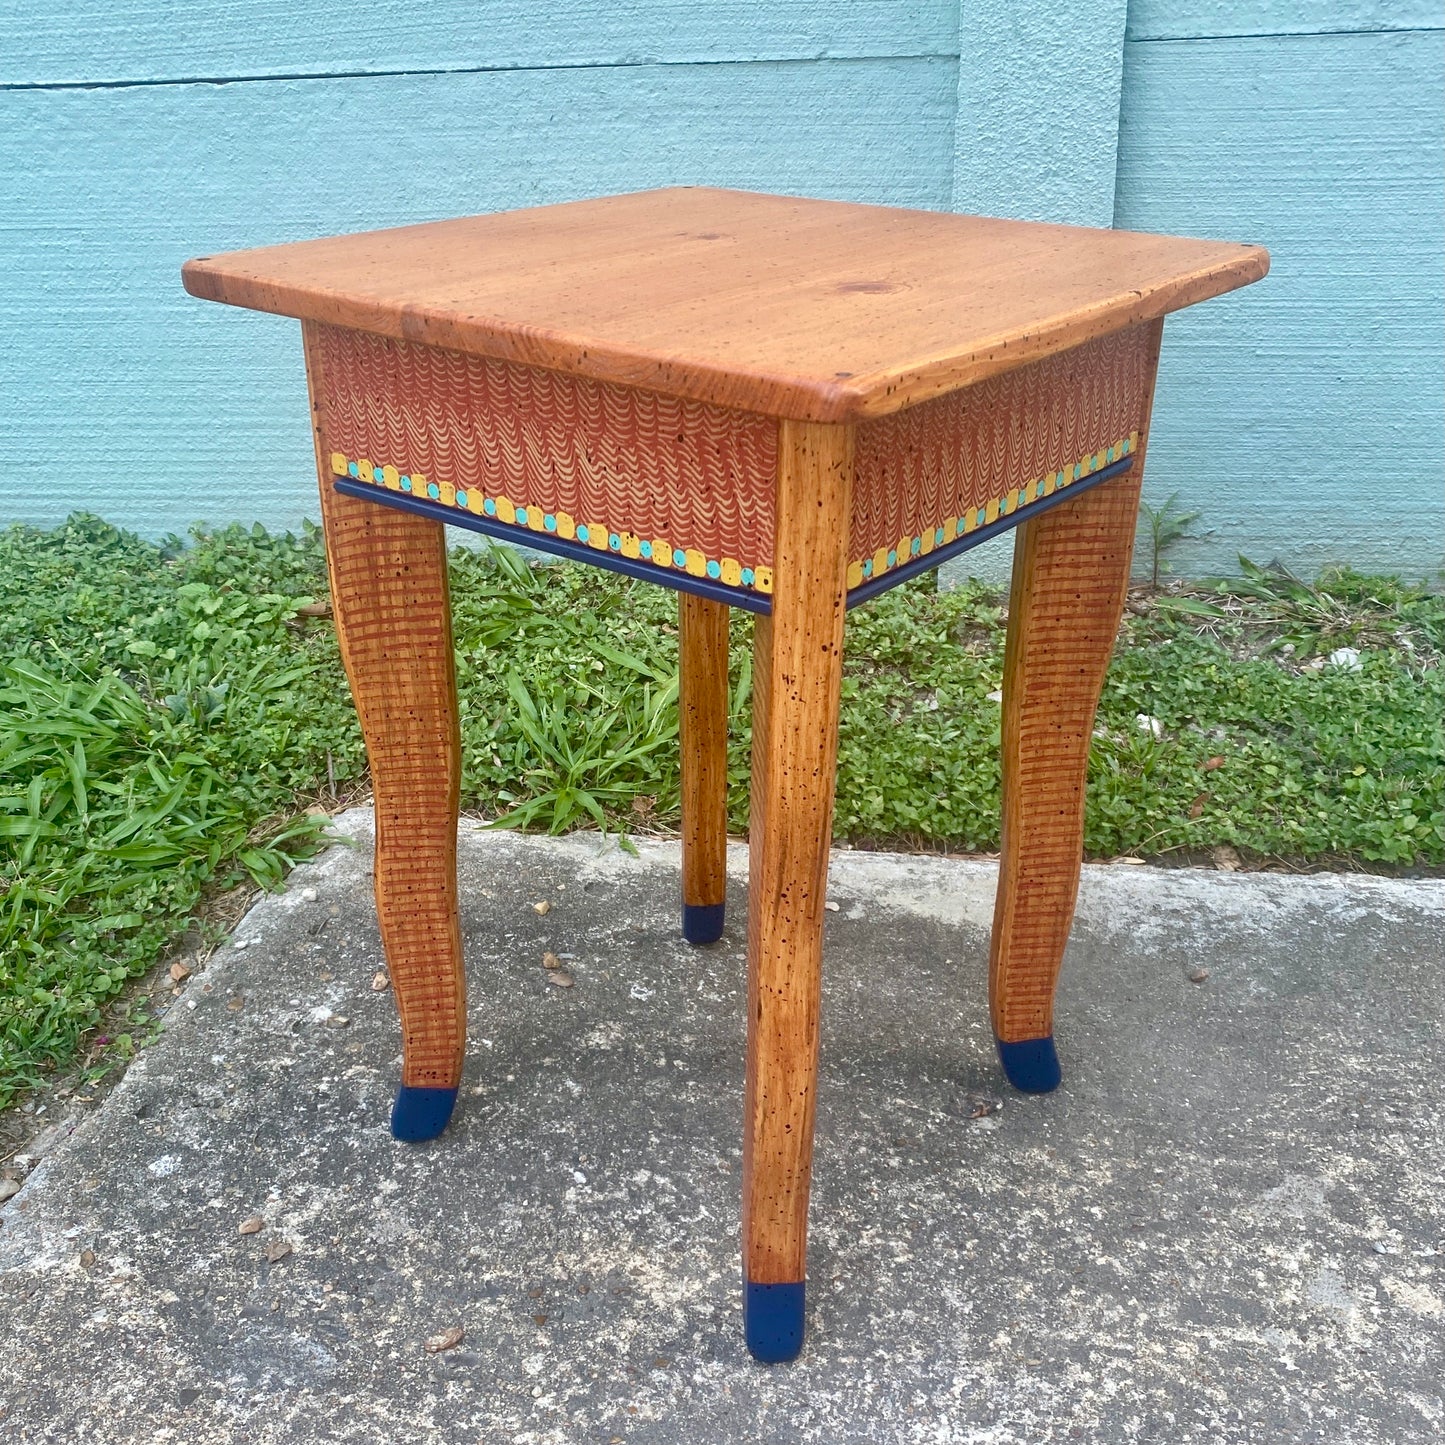 David Marsh 18” Square Side Table with Wiggle Legs